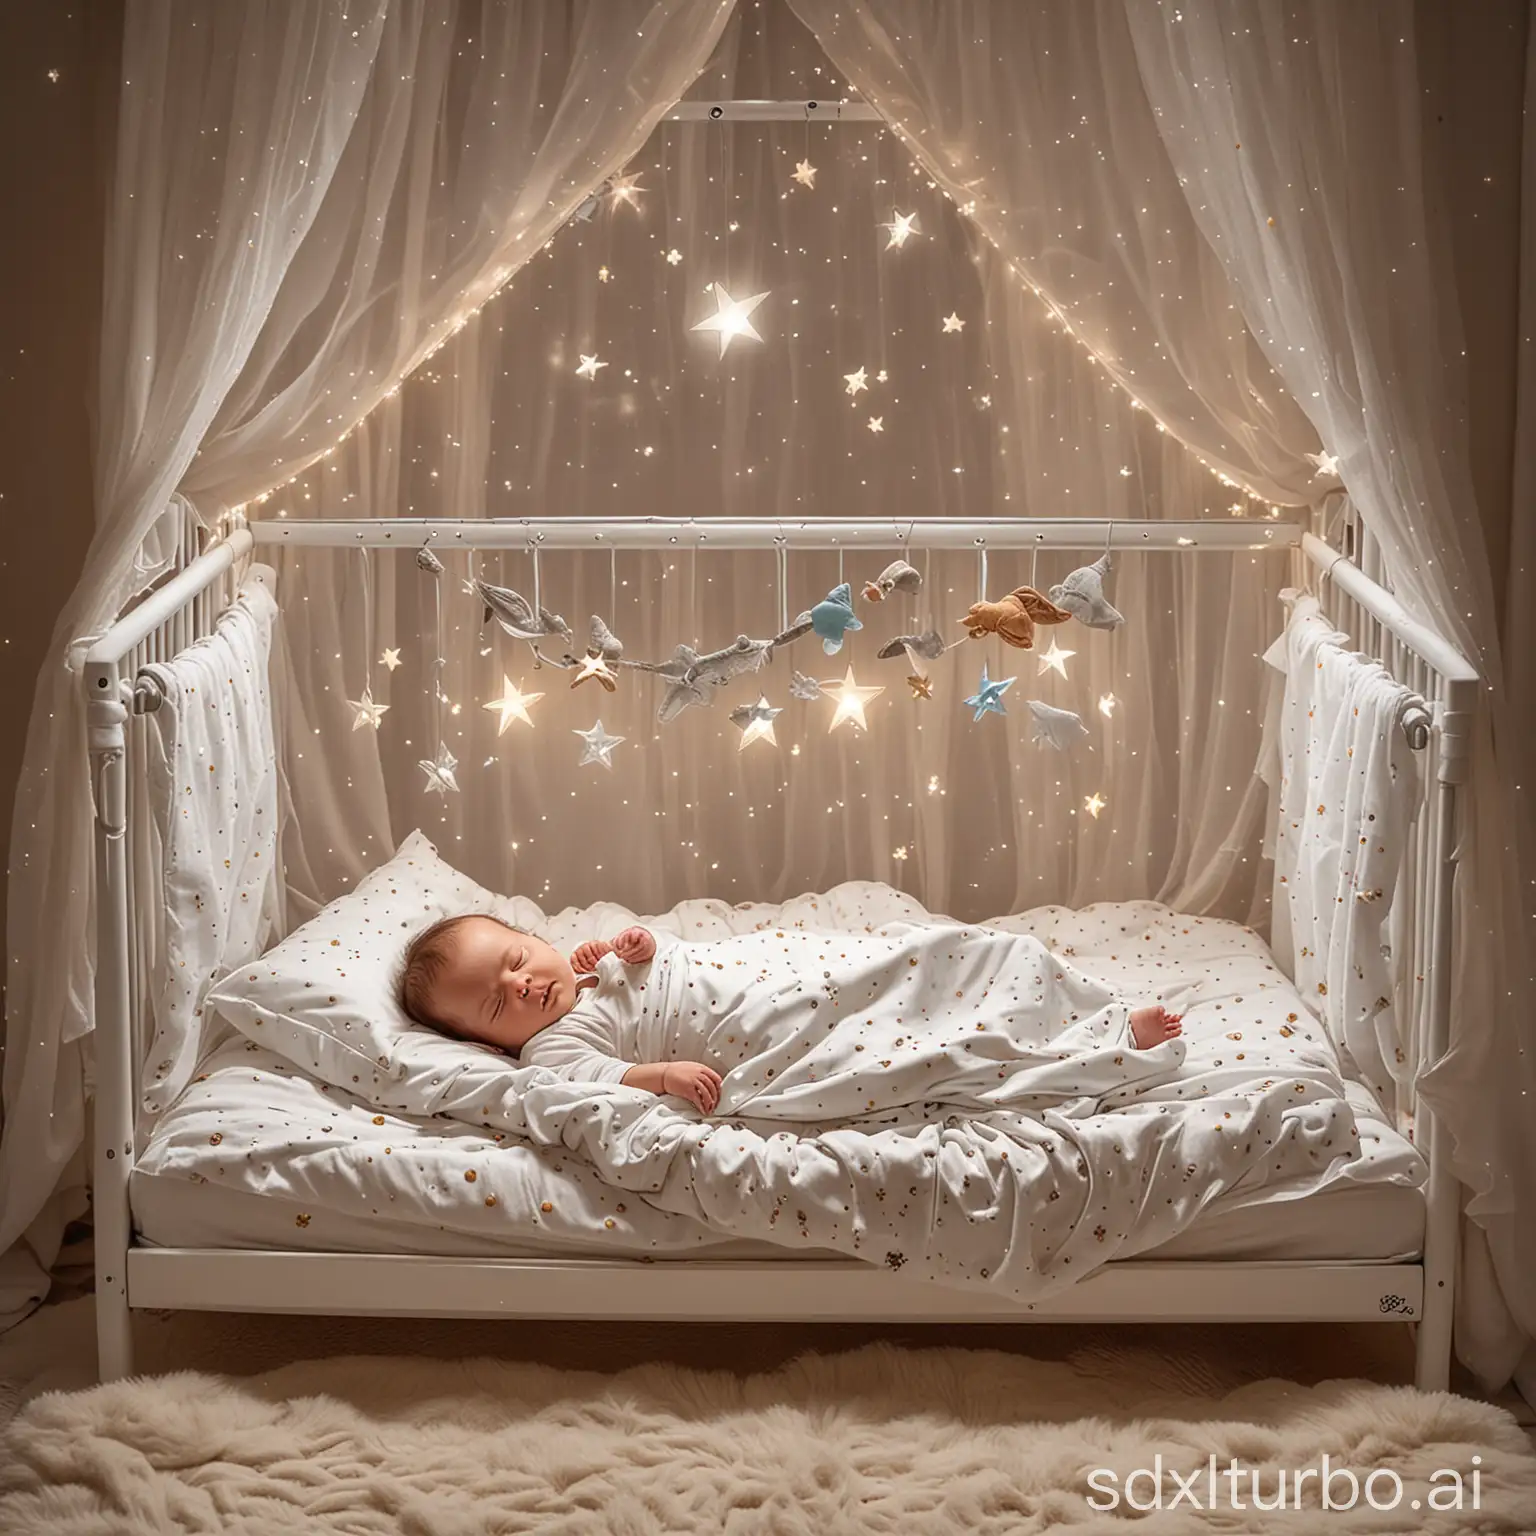  A baby is sleeping in a crib that is designed to look like a spaceship. The bedsheets show glowing stars and planets, and a mobile of twinkling stars hangs above it. The little astronaut is dreaming of distant galaxies and exciting adventures.